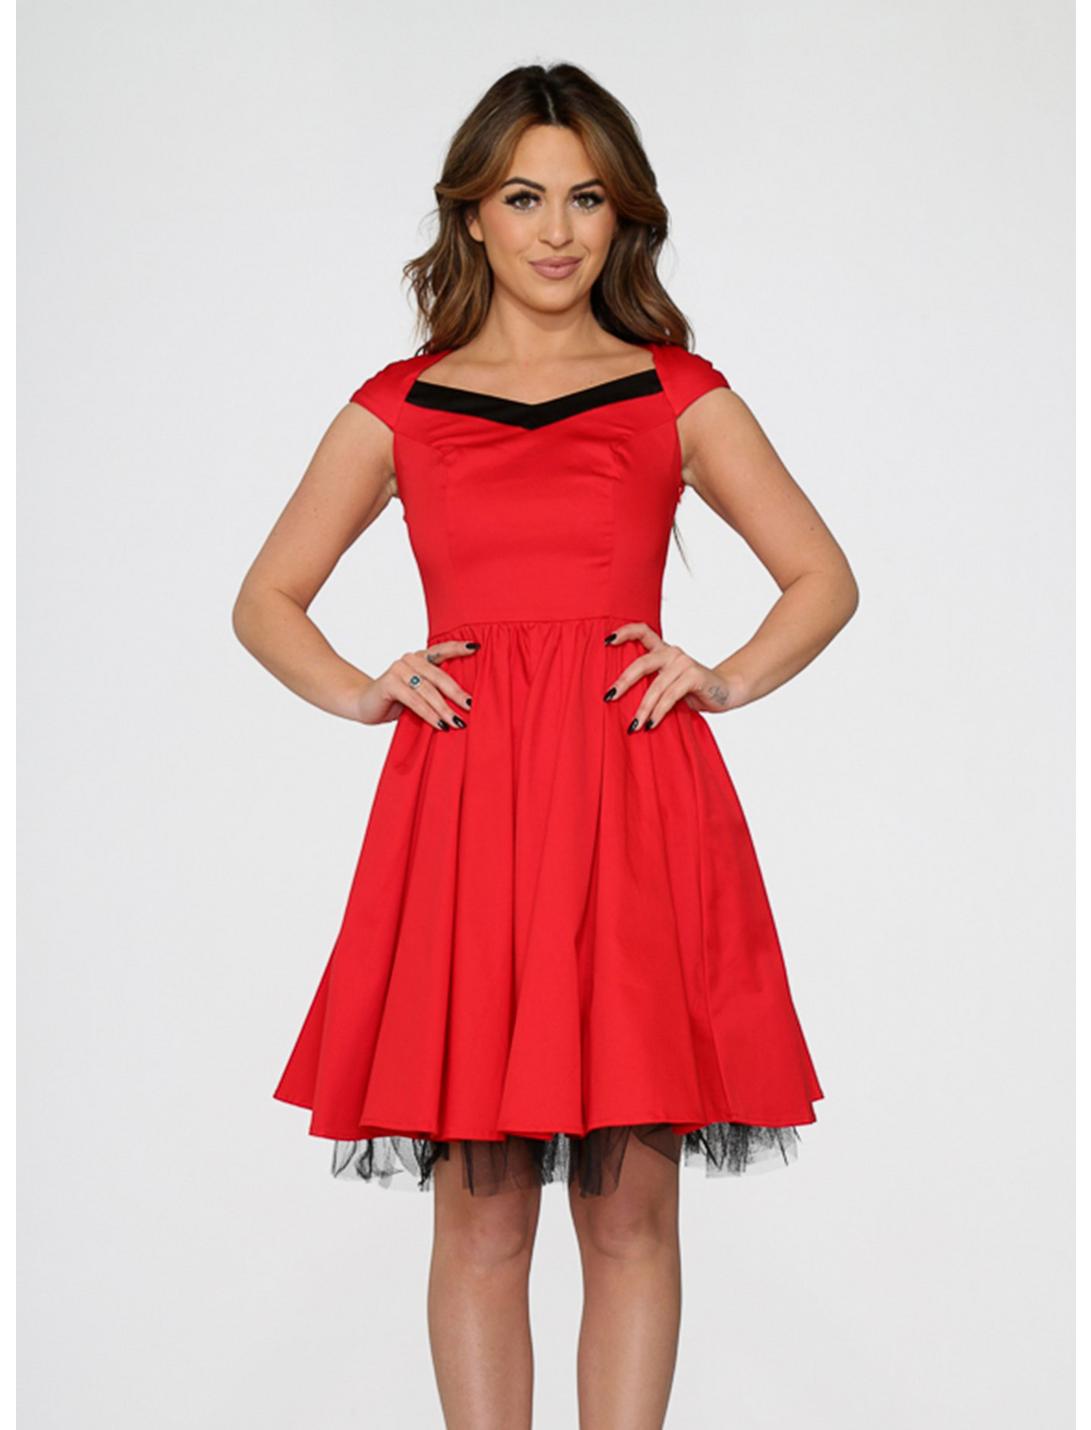 Retro Red Tulle Swing Dress, BLACK  RED, hi-res